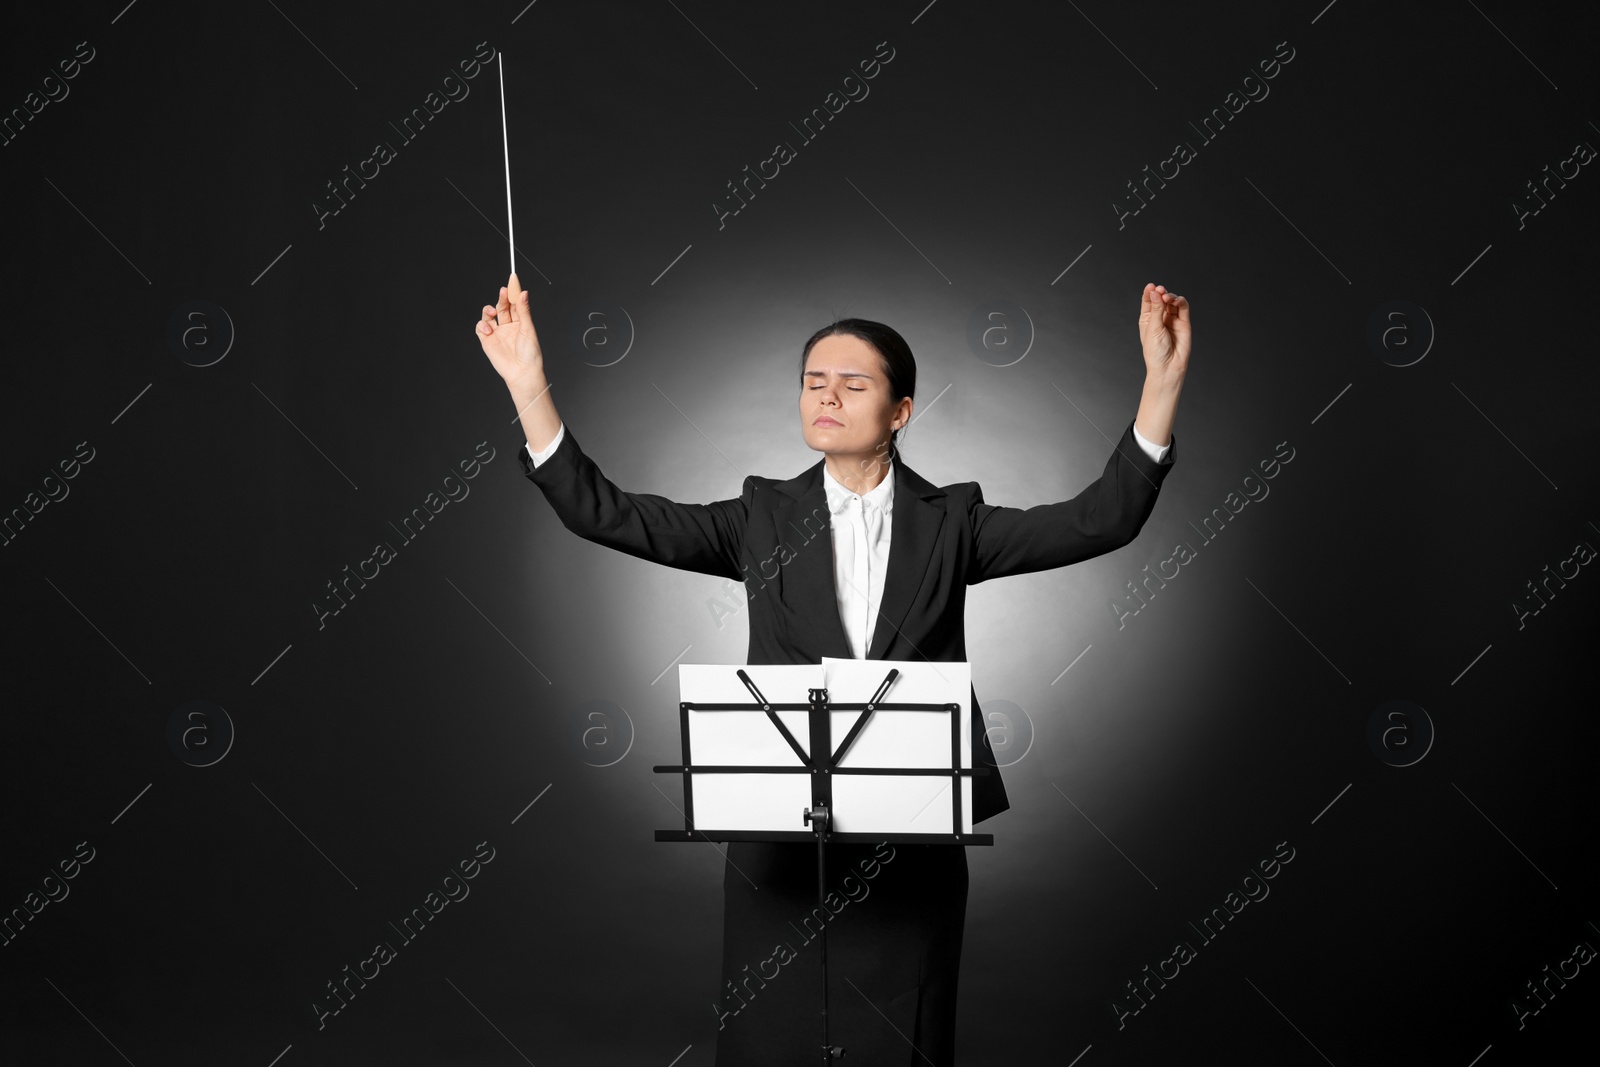 Photo of Professional conductor with baton and note stand on black background